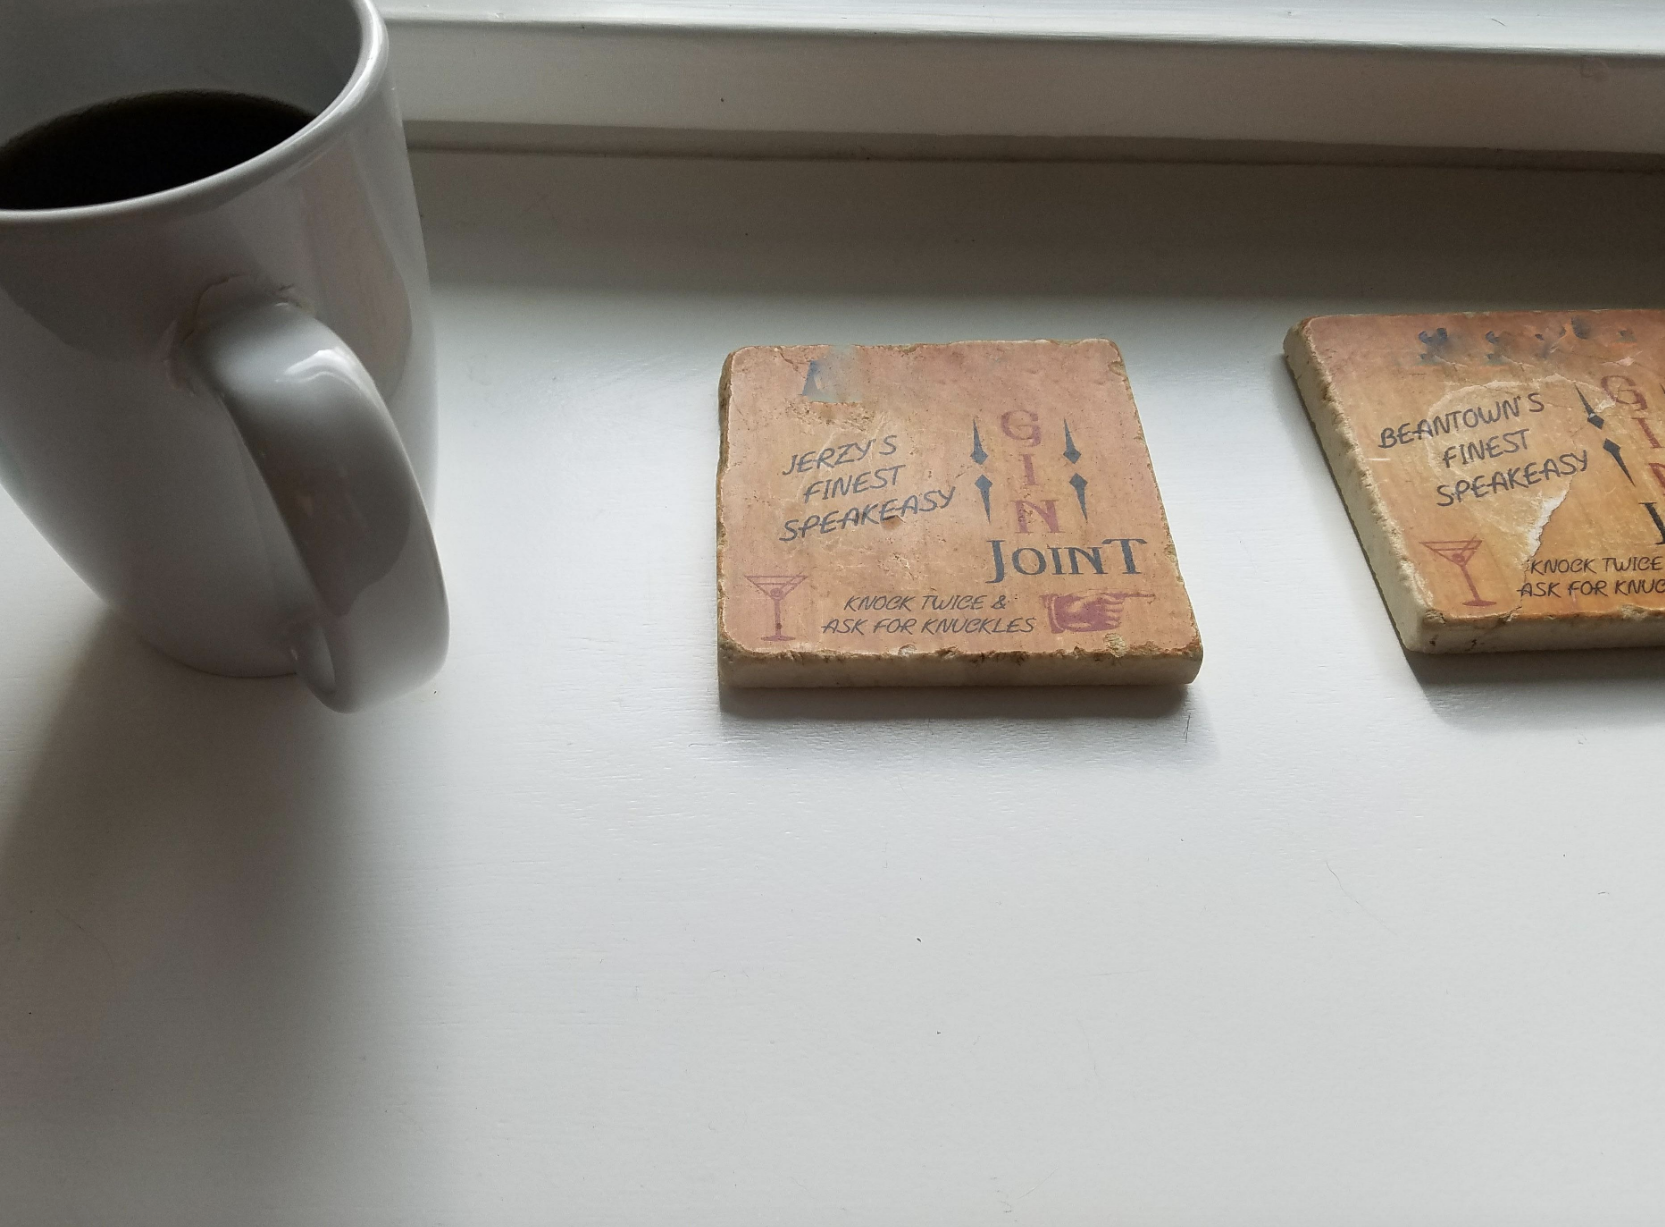 A cup next to coasters